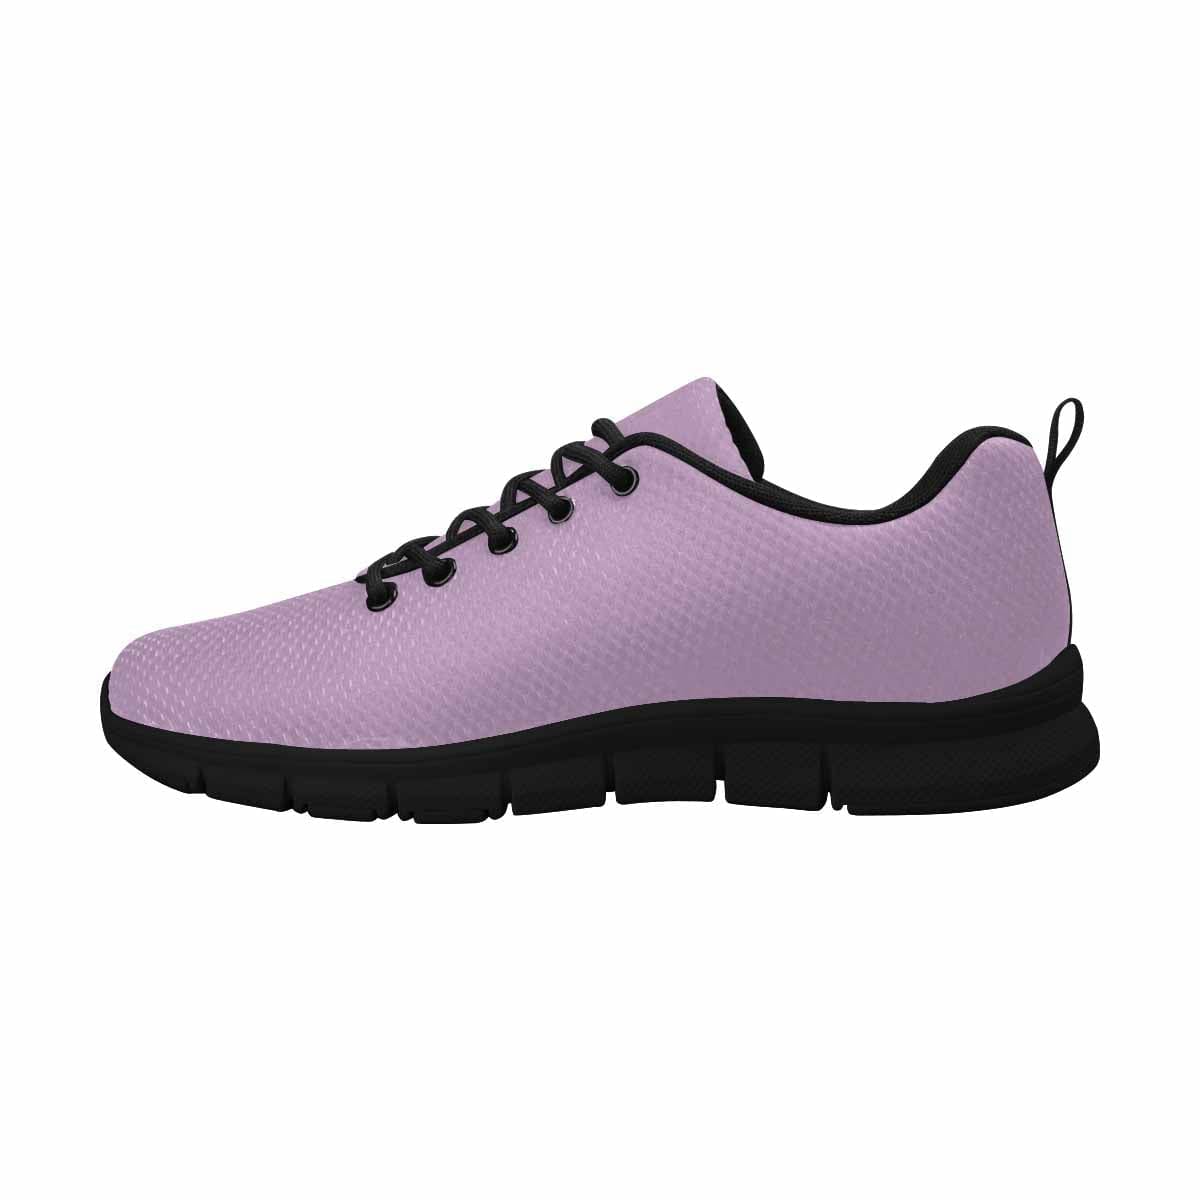 Sneakers For Men Lilac Purple Running Shoes - Mens | Sneakers | Running